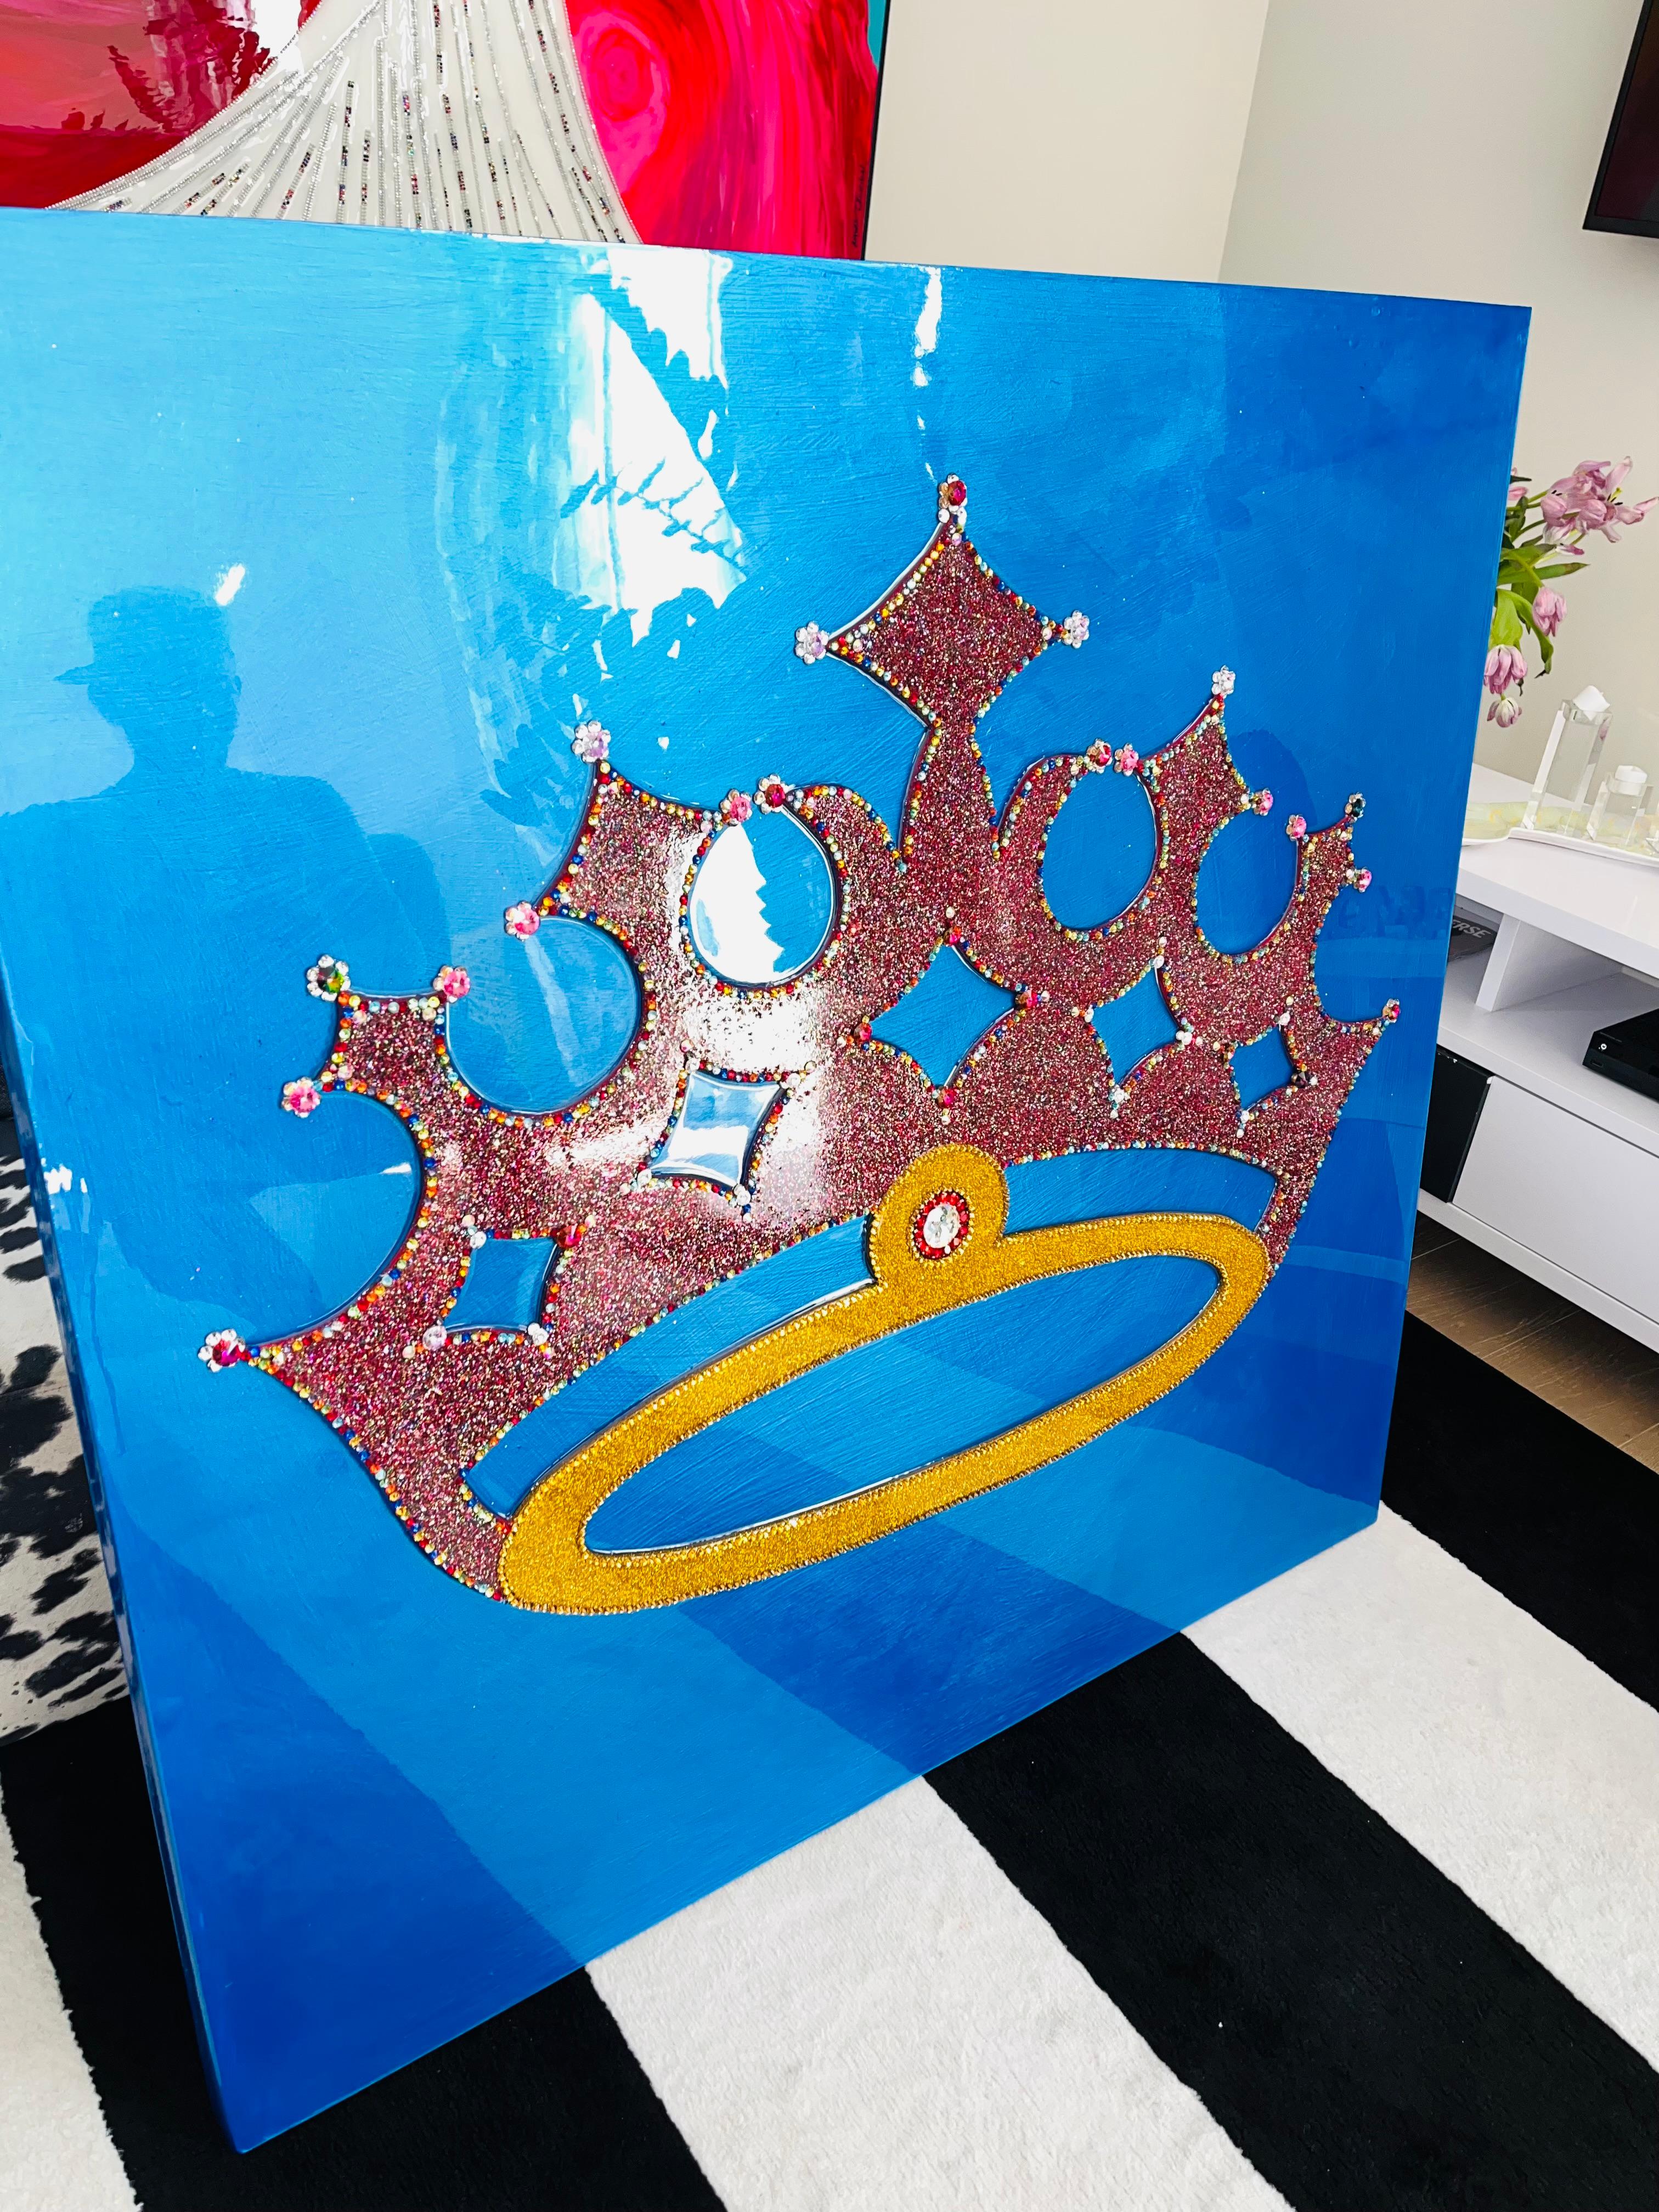 >>LIMITED TIME SALE<<

***Looking for one of kind precious high ending gift that no one else will have? This is one of them!***

Absolutely and positively ONE OF A KIND Crown Celebrating Queen Elizabeth's 70th Anniversary Jubilee encrusted with